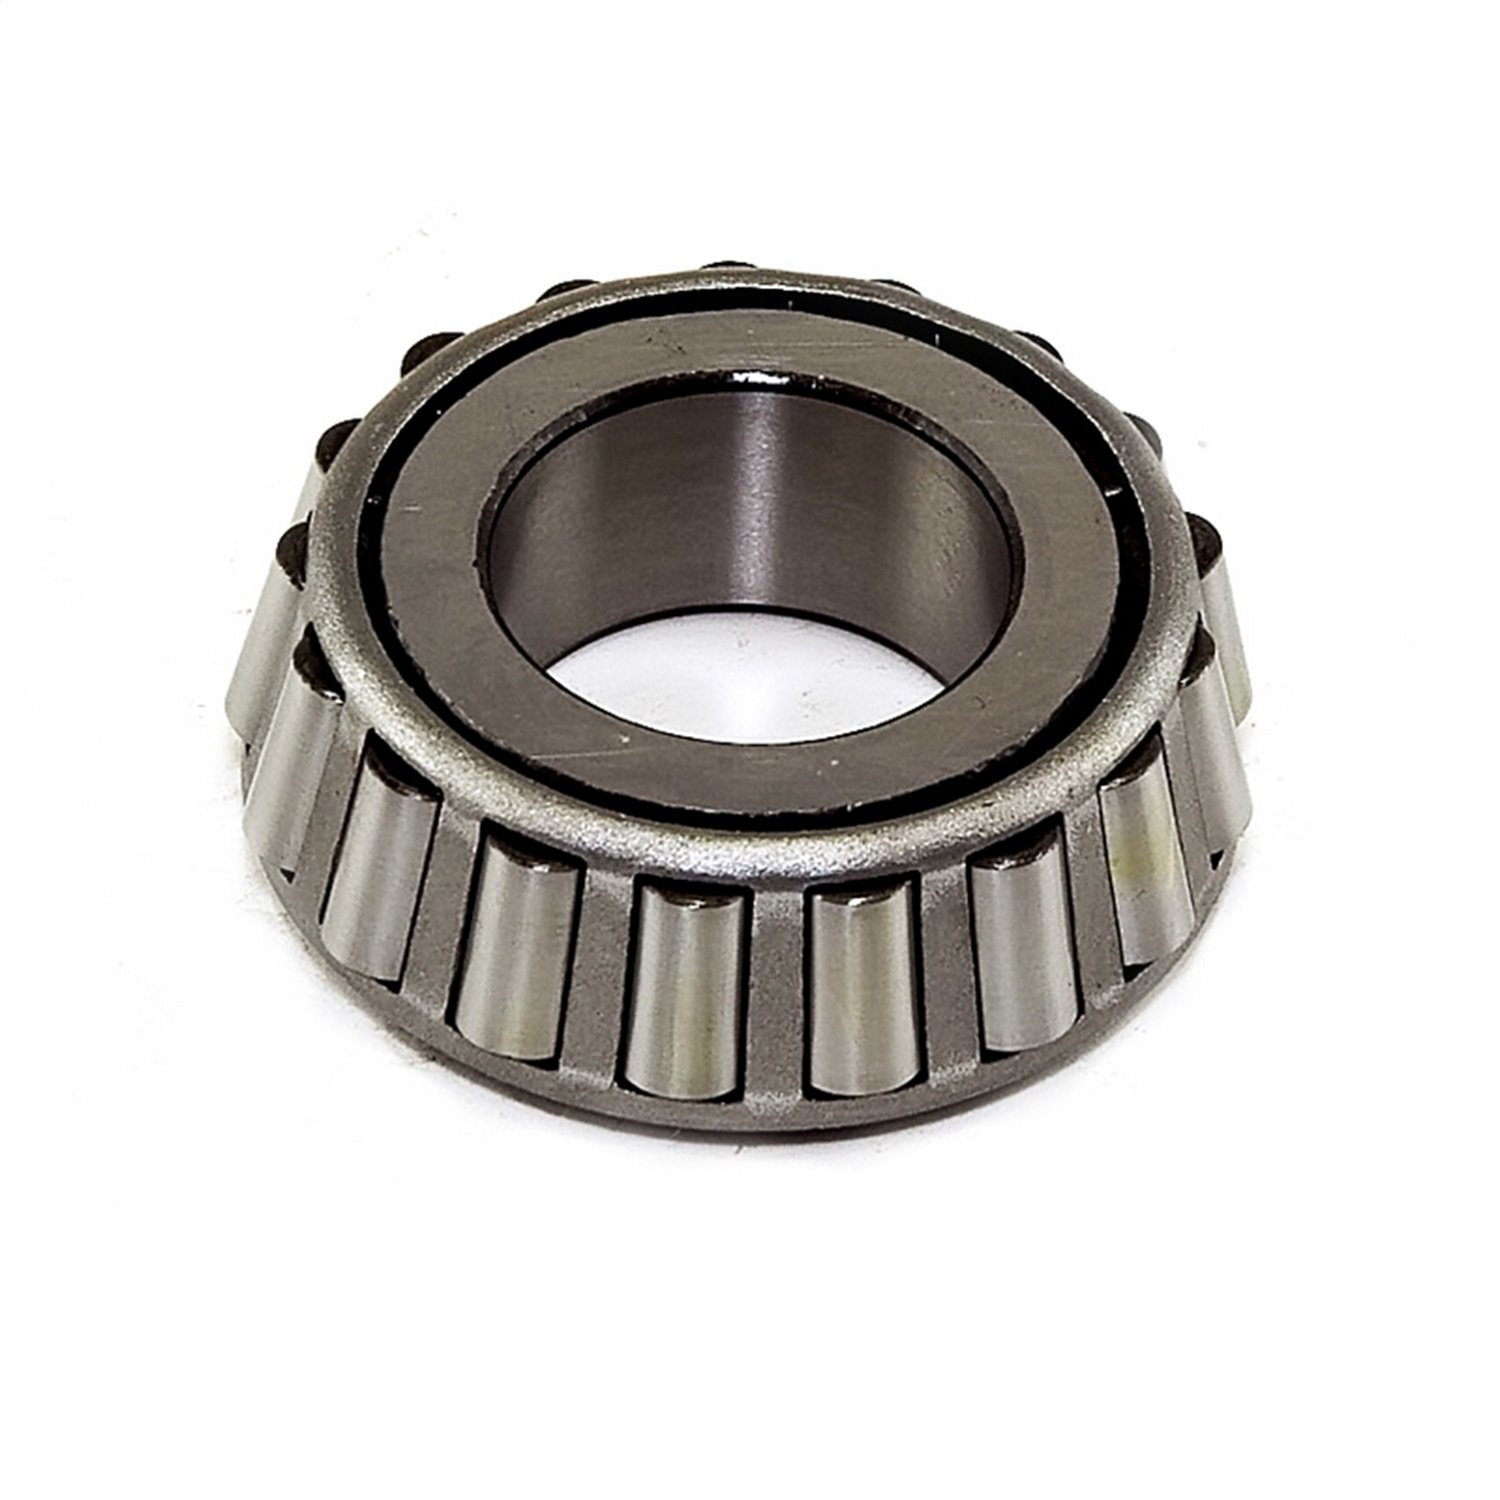 This Dana 20 transfer case output shaft bearing cone from Omix-ADA fits 72-79 Jeep CJ models. Two required.